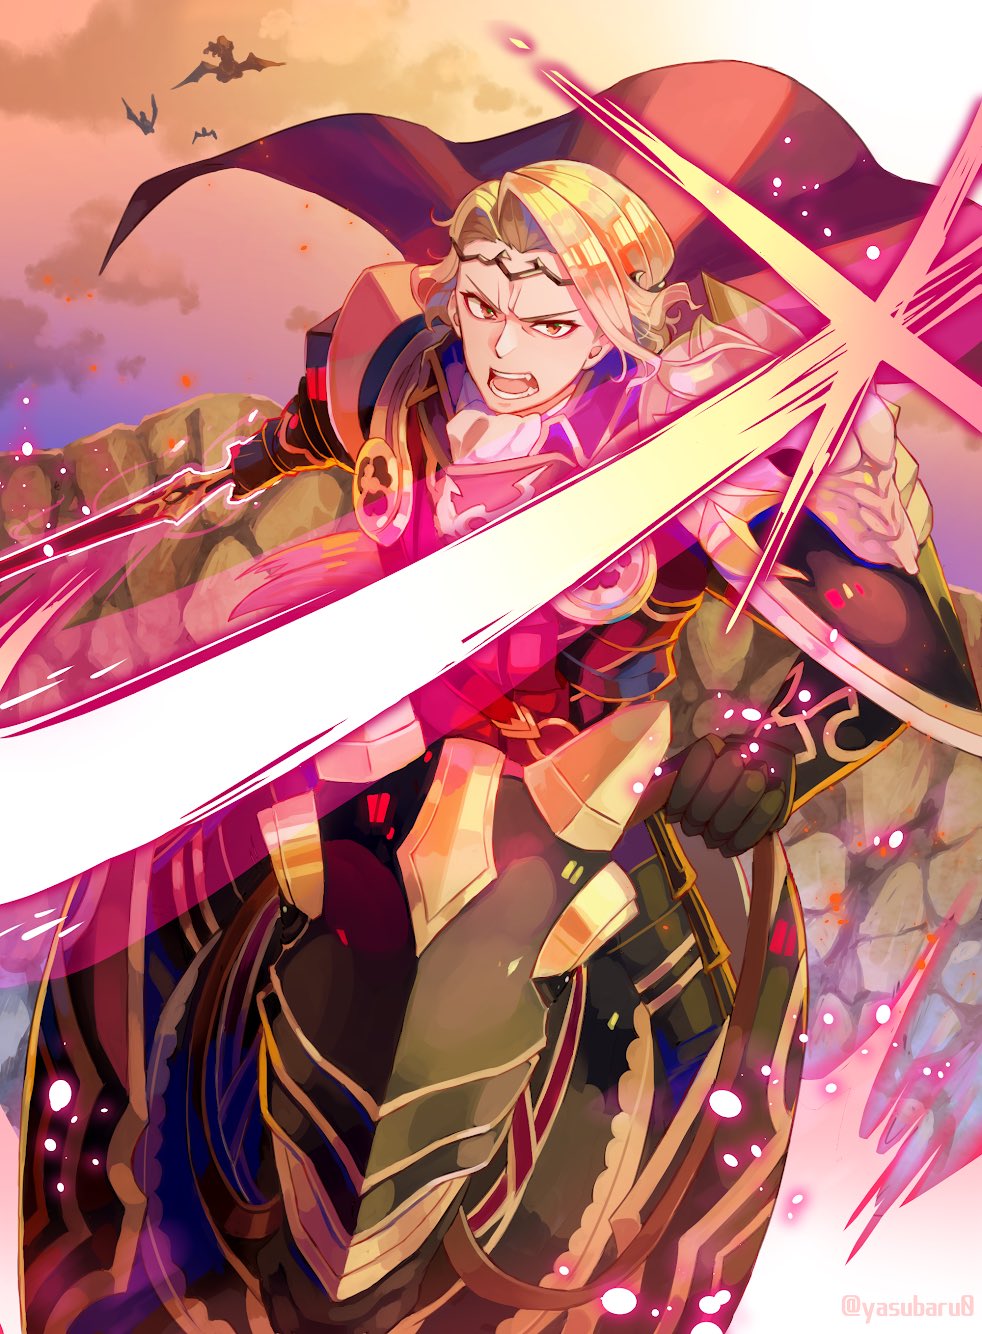 1boy armor blonde_hair cape clouds cloudy_sky fire_emblem fire_emblem_fates gloves highres holding holding_sword holding_weapon horseback_riding incoming_attack looking_at_viewer open_mouth riding sky slashing sword weapon xander_(fire_emblem) yasubaru yellow_eyes